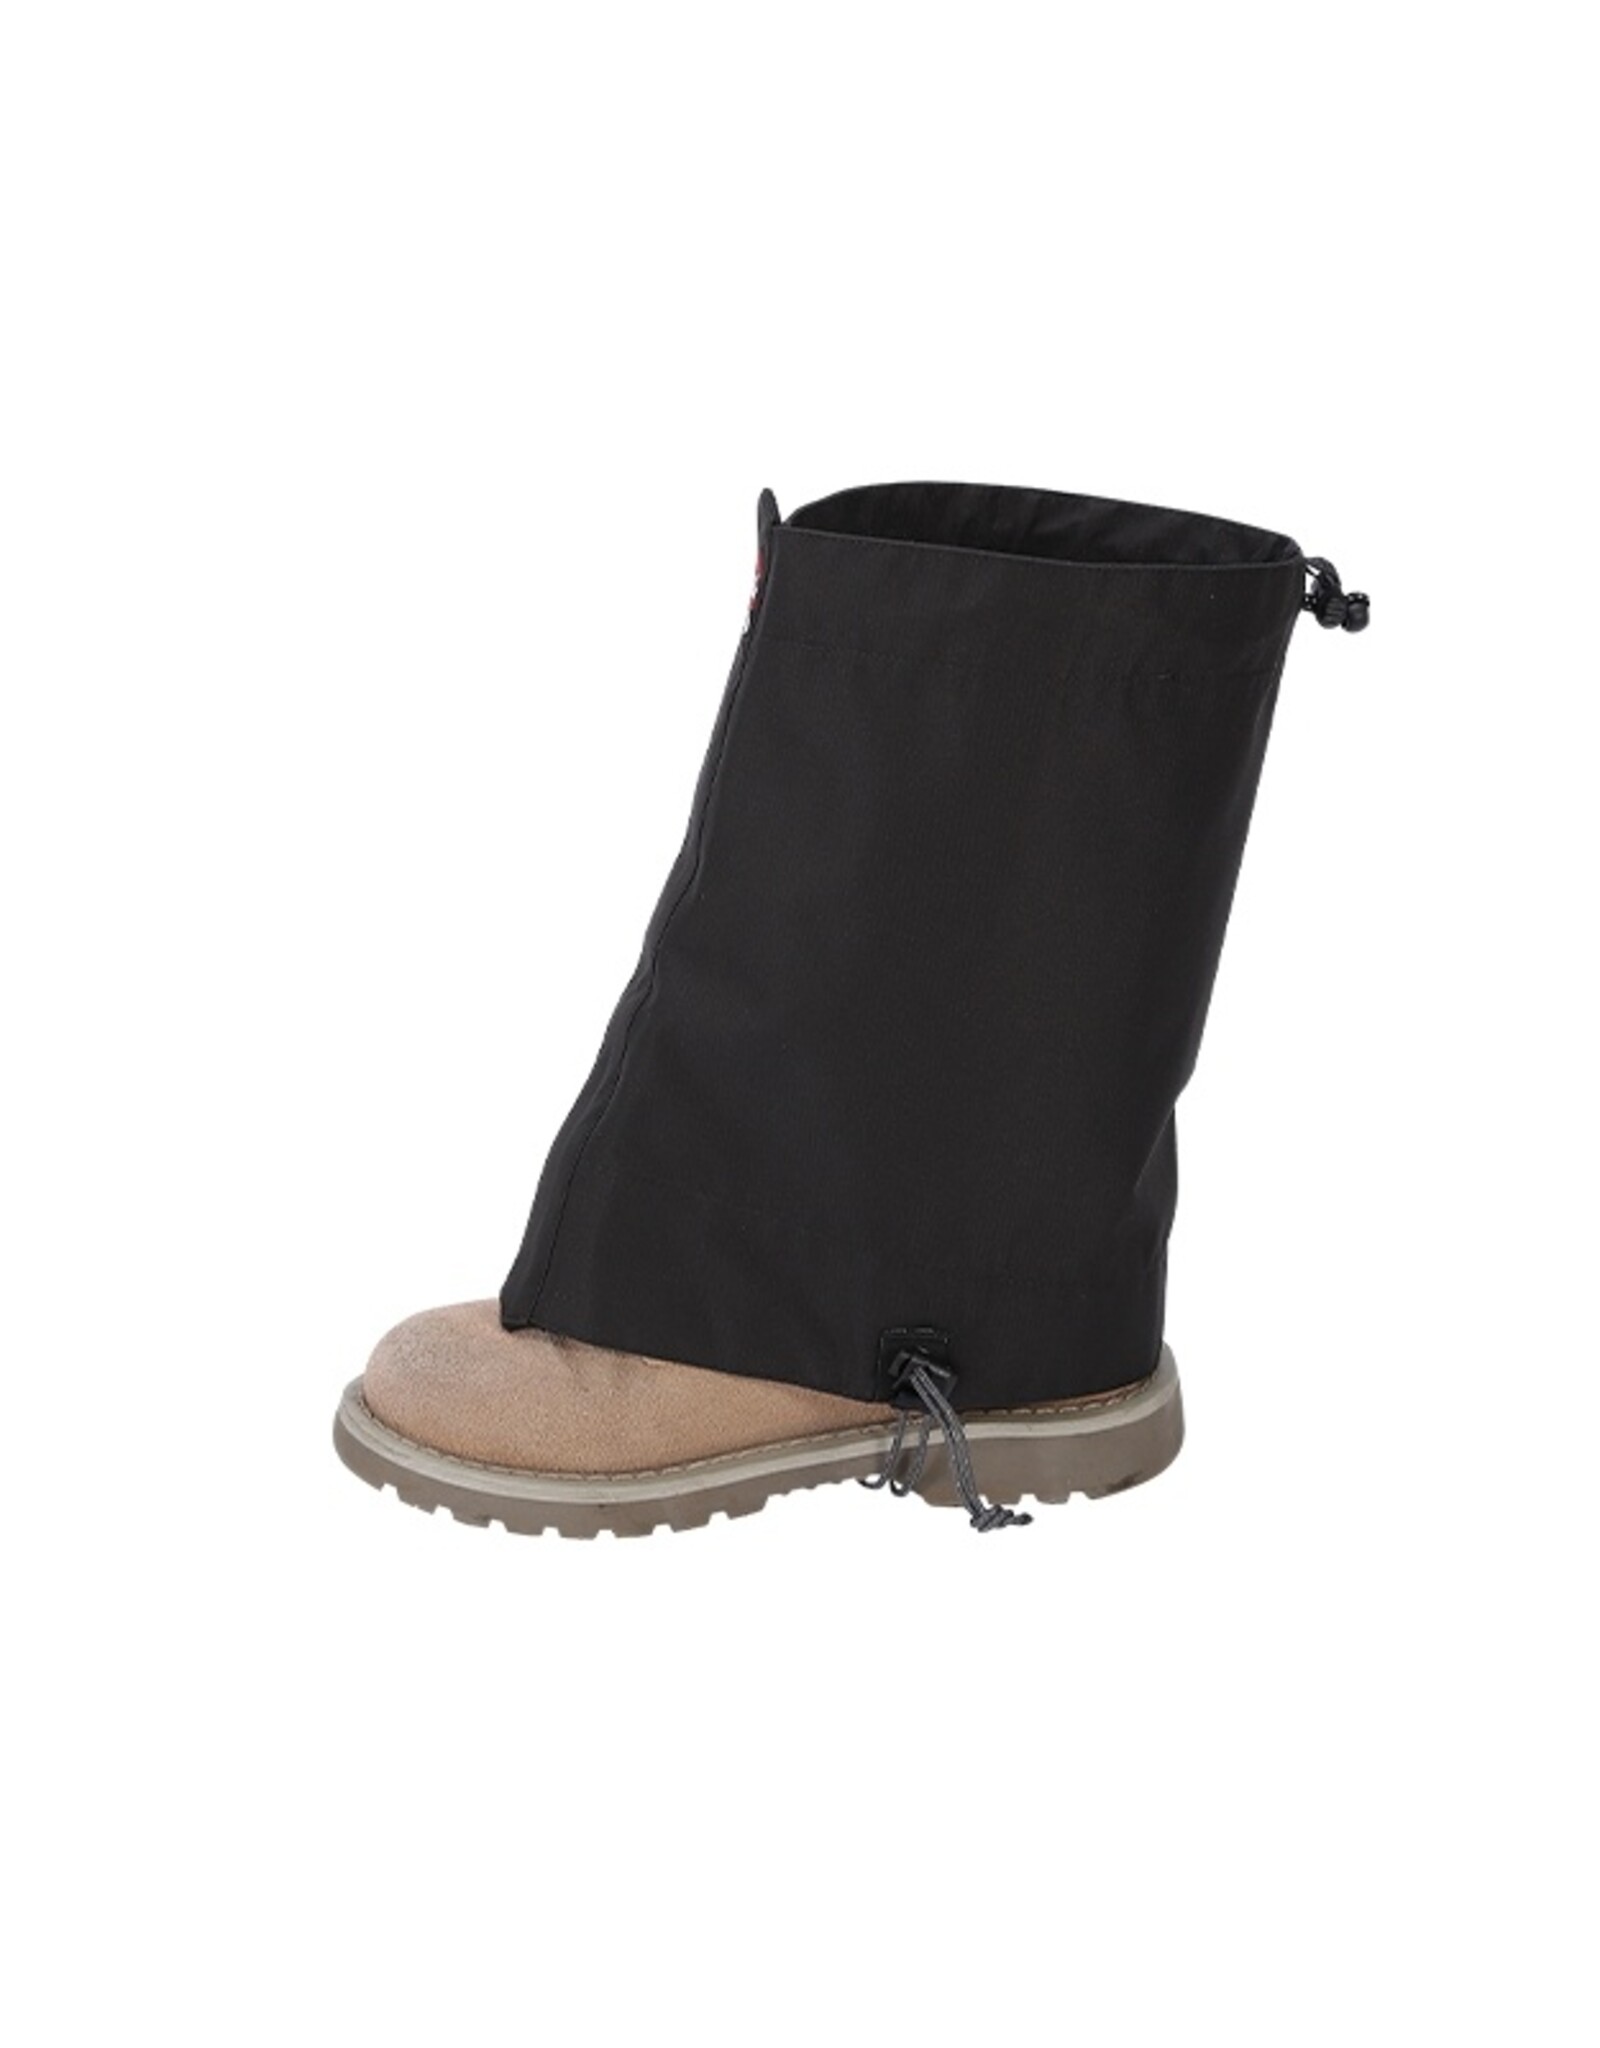 CHINOOK TECHNICAL OUTDOOR APPROACH GAITERS